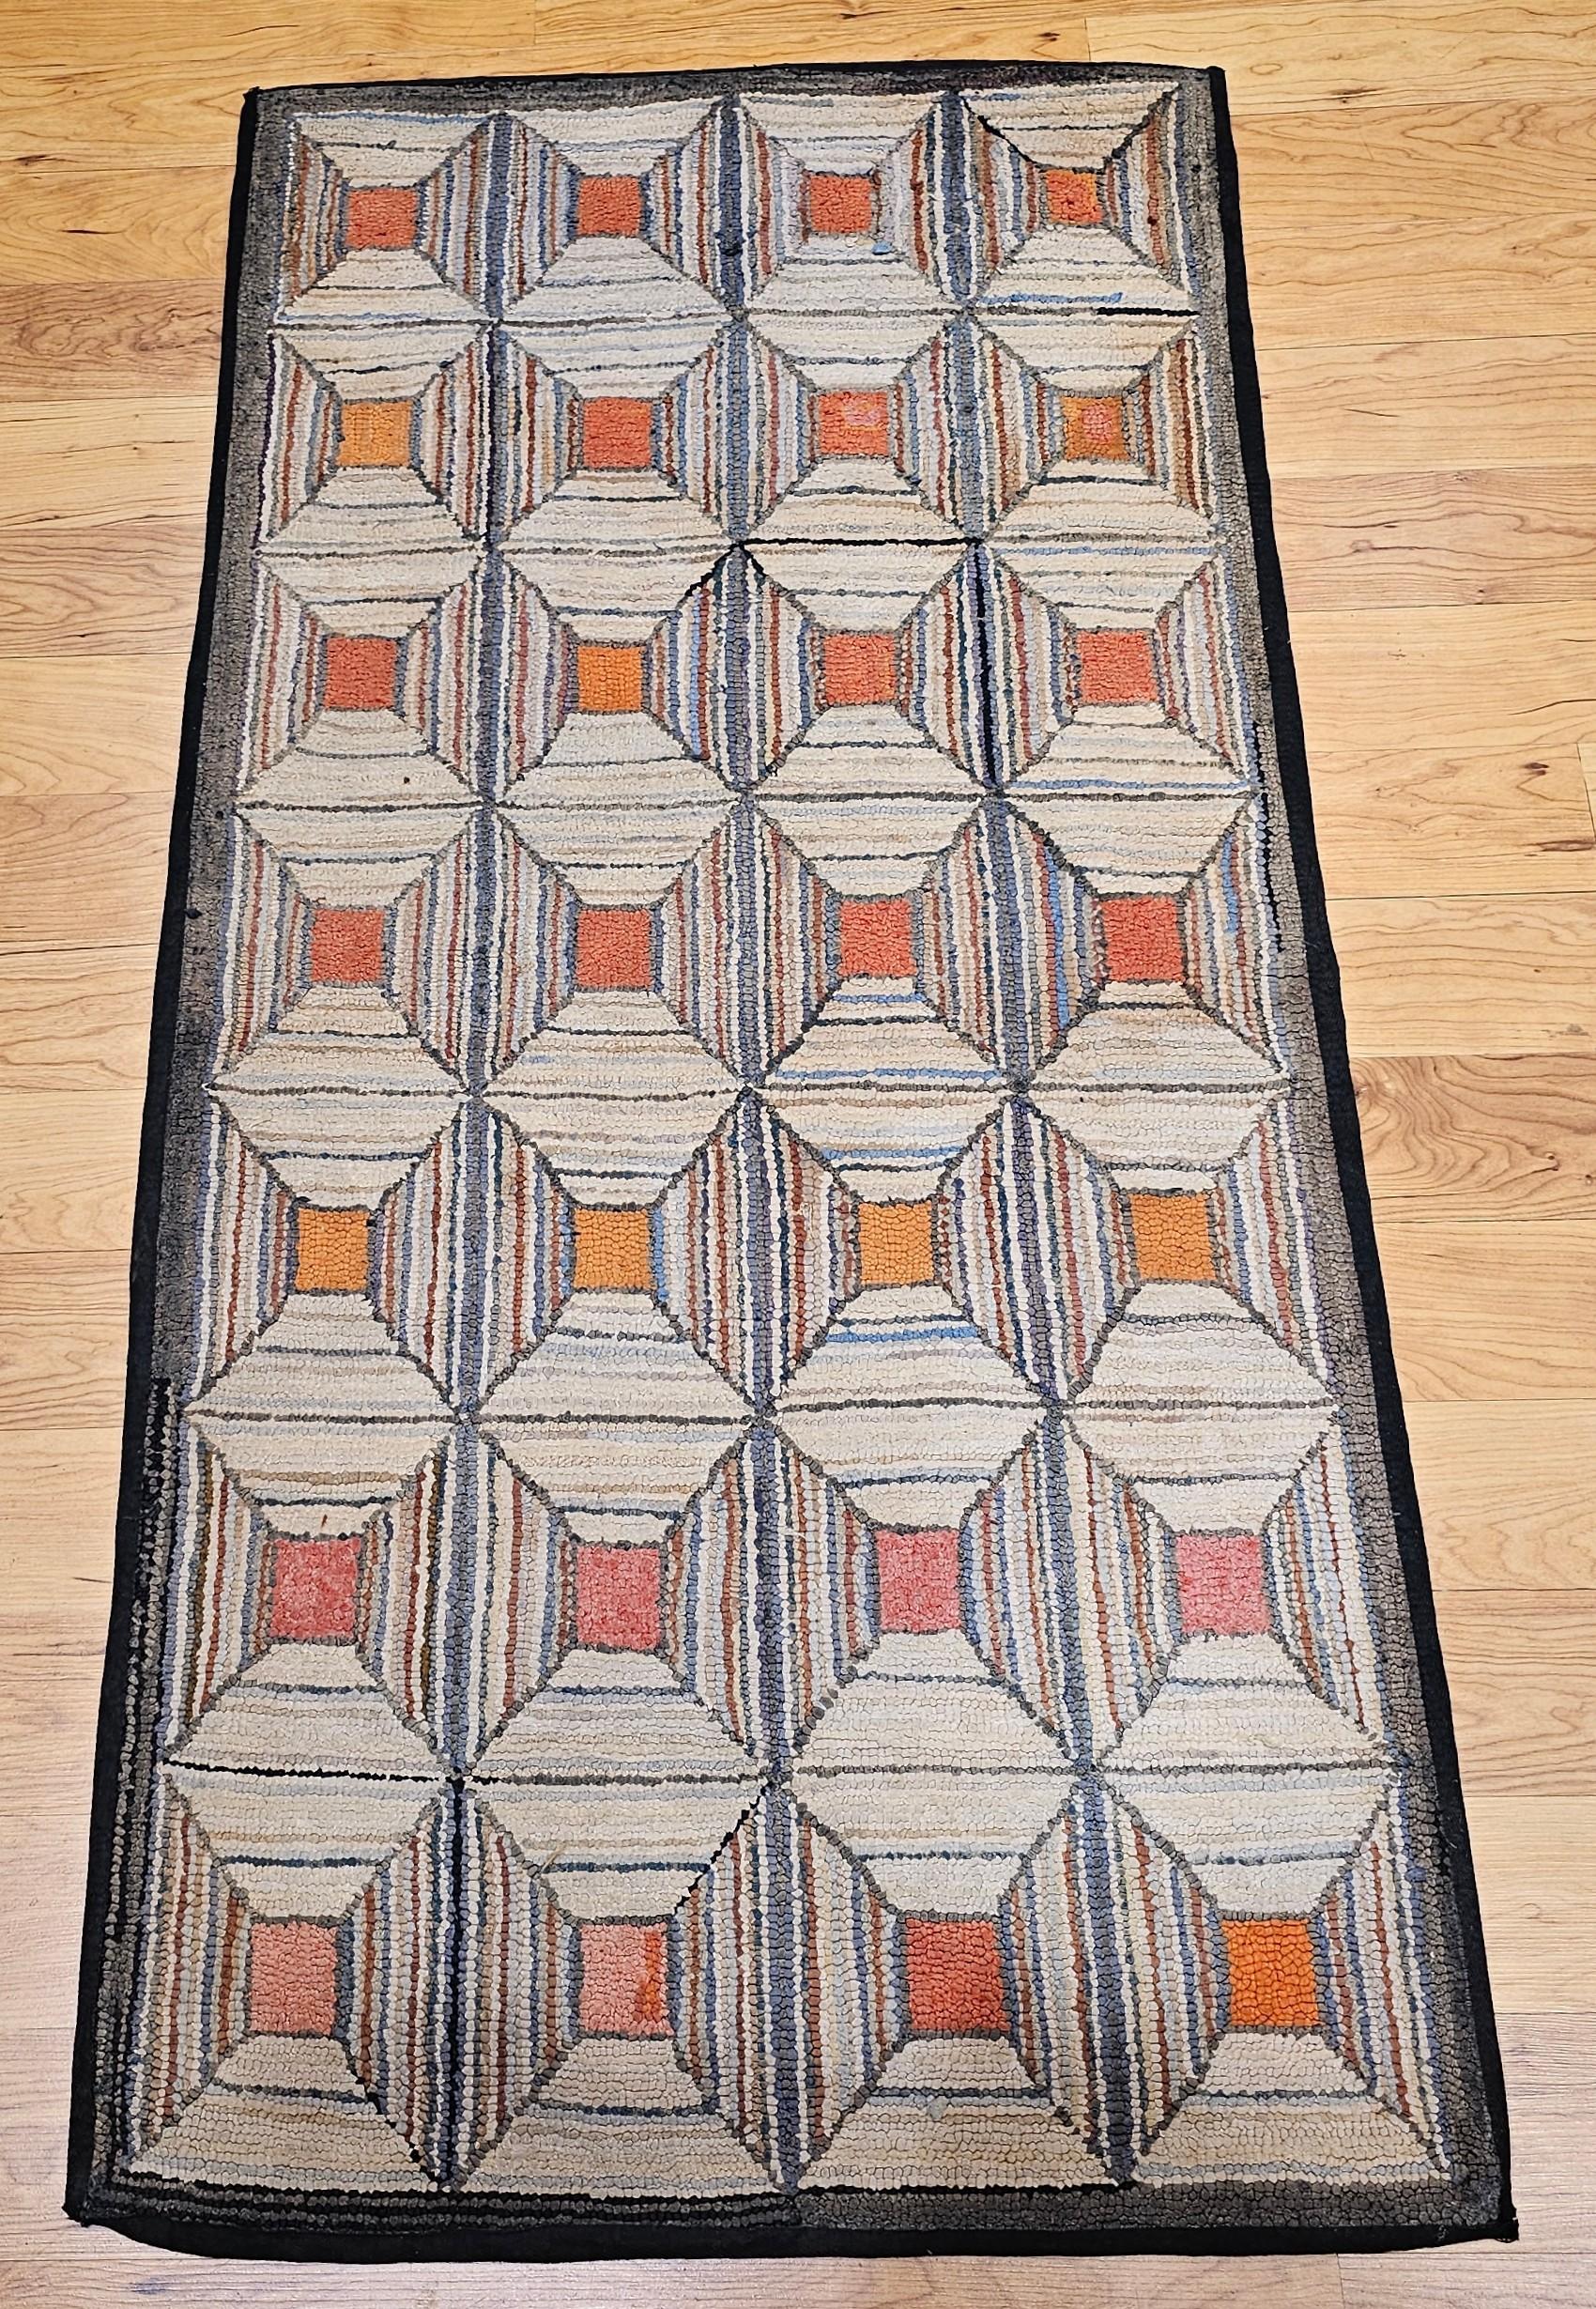  A vintage American hand hooked rug in a geometric pattern handcrafted in the 4th quarter of the 1800s in the New England Area of the United States.  The design of each block gives the impression of looking down a funnel with the solid color in the